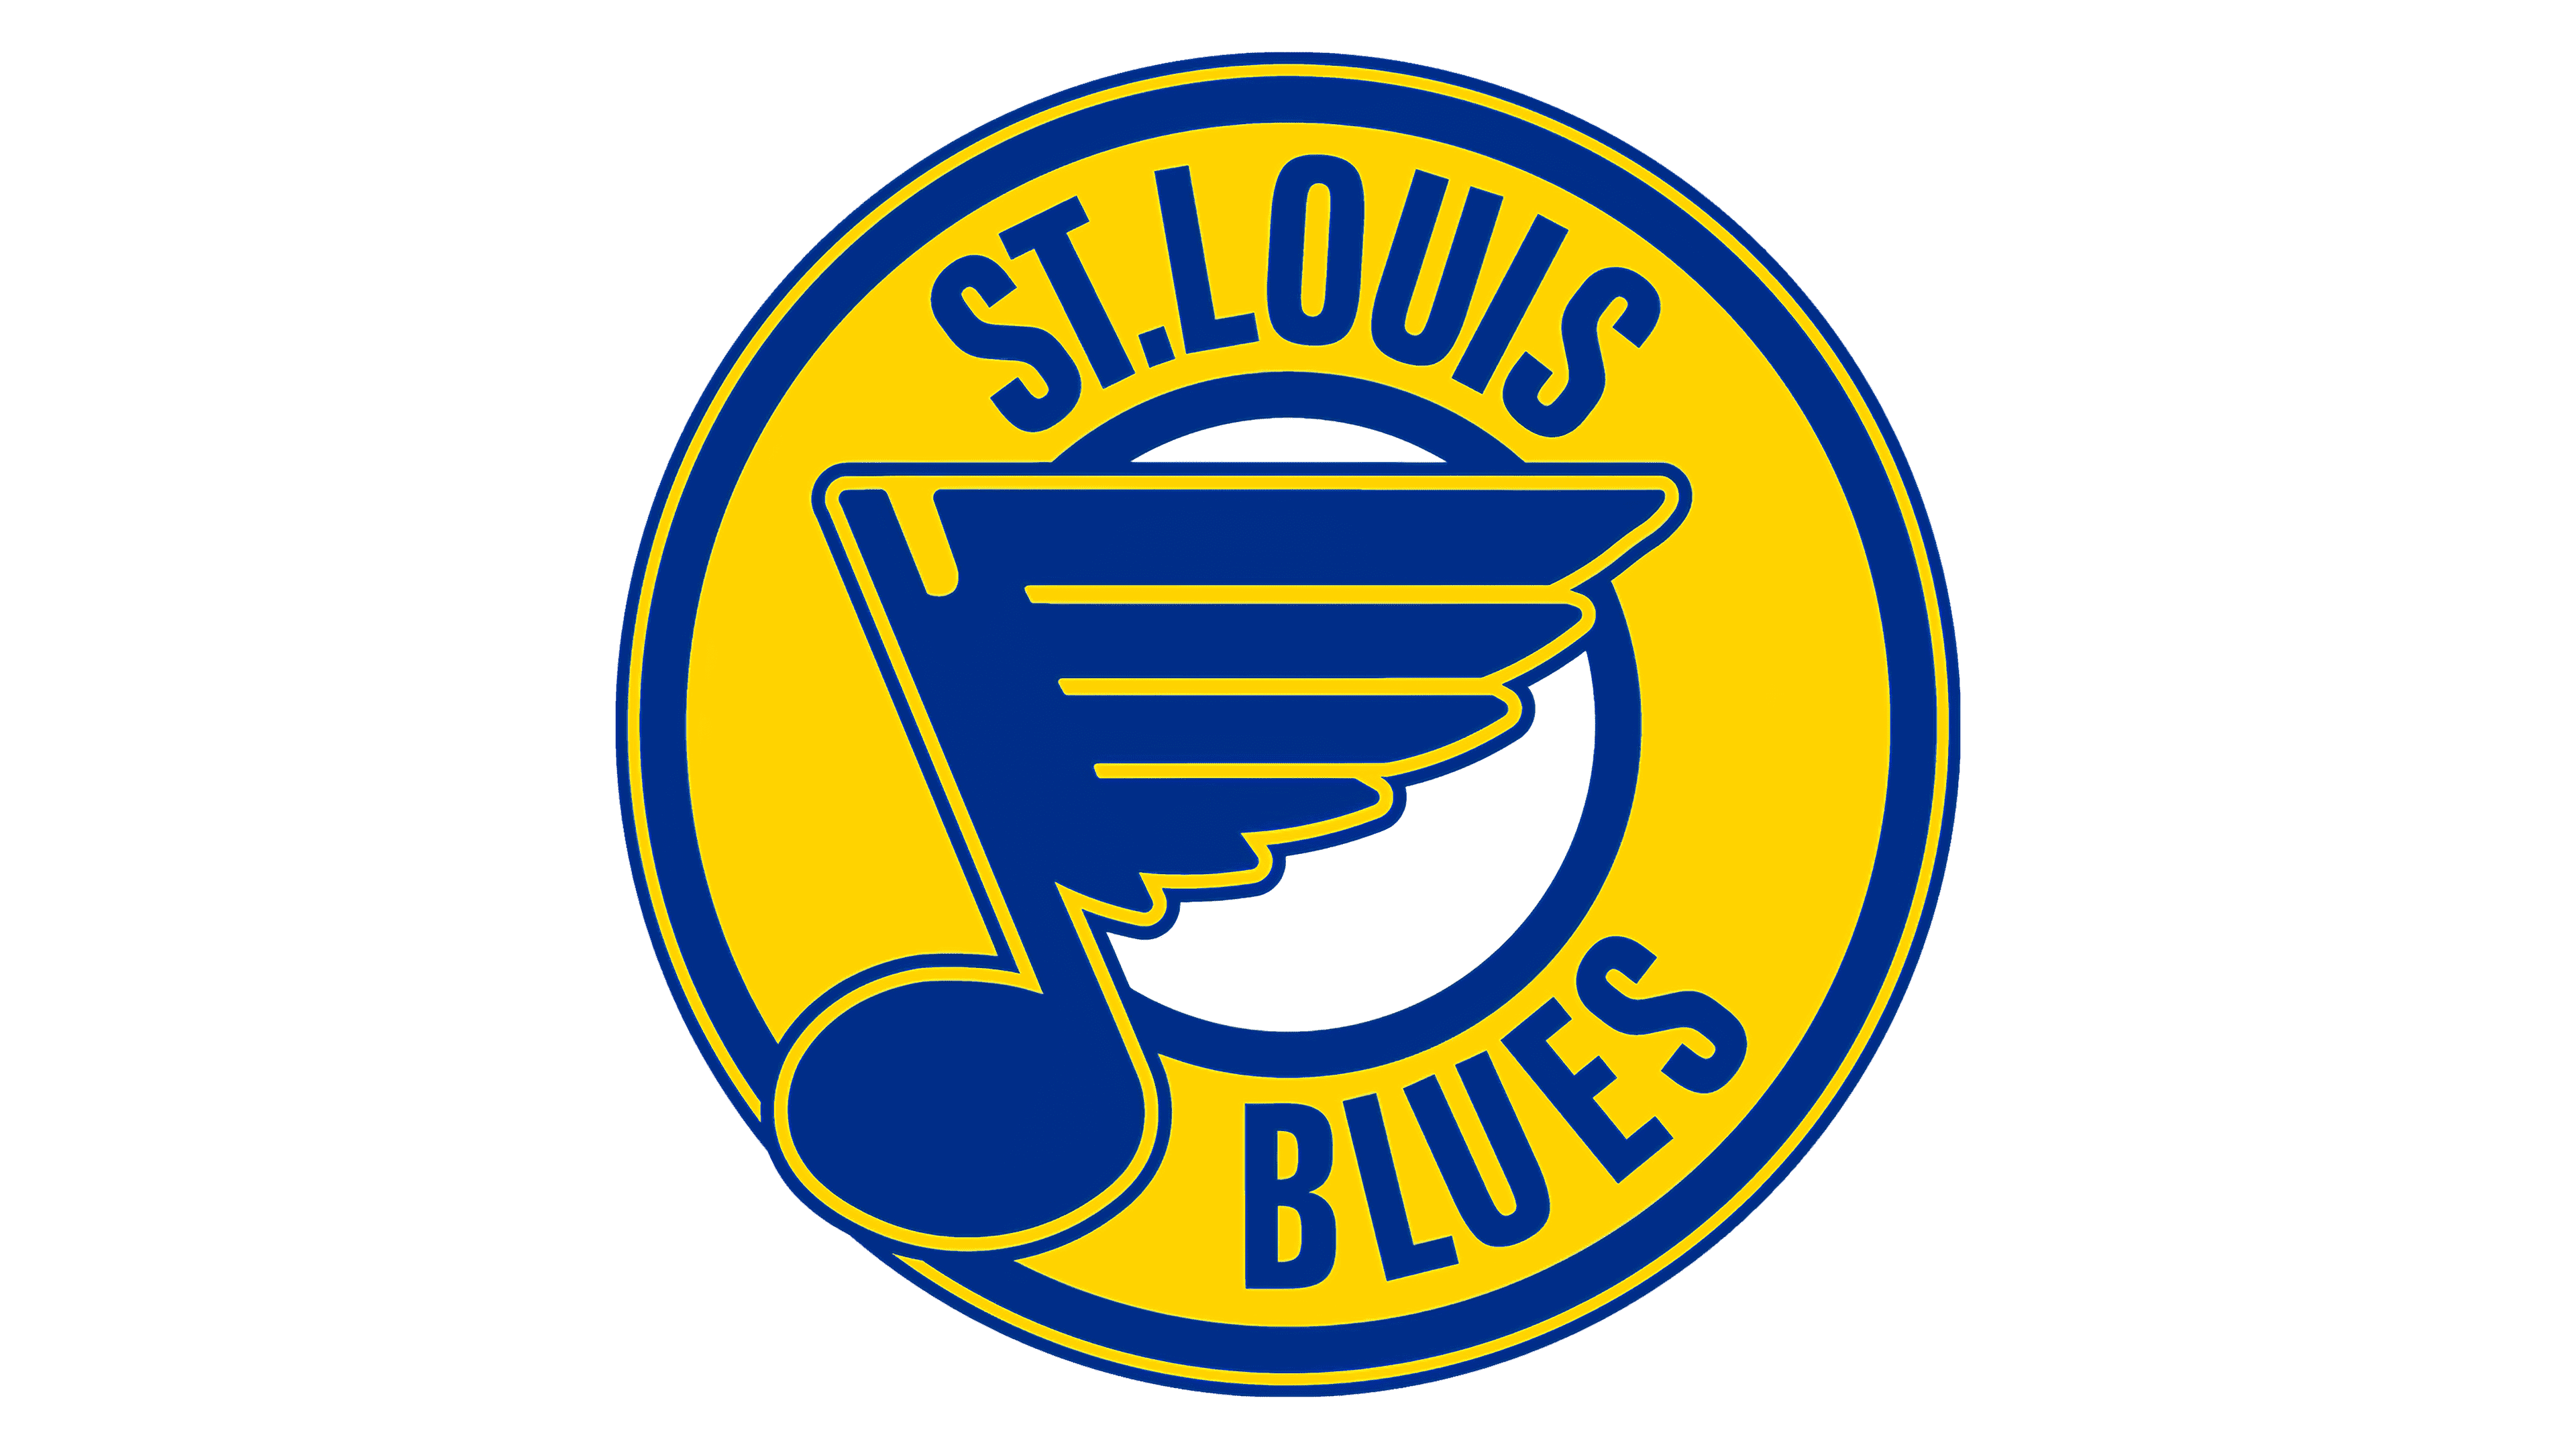 Wallpaper ice, wing, emblem, note, NHL, NHL, St. Louis Blues, St. Louis  Blues, hockey club images for desktop, section спорт - download